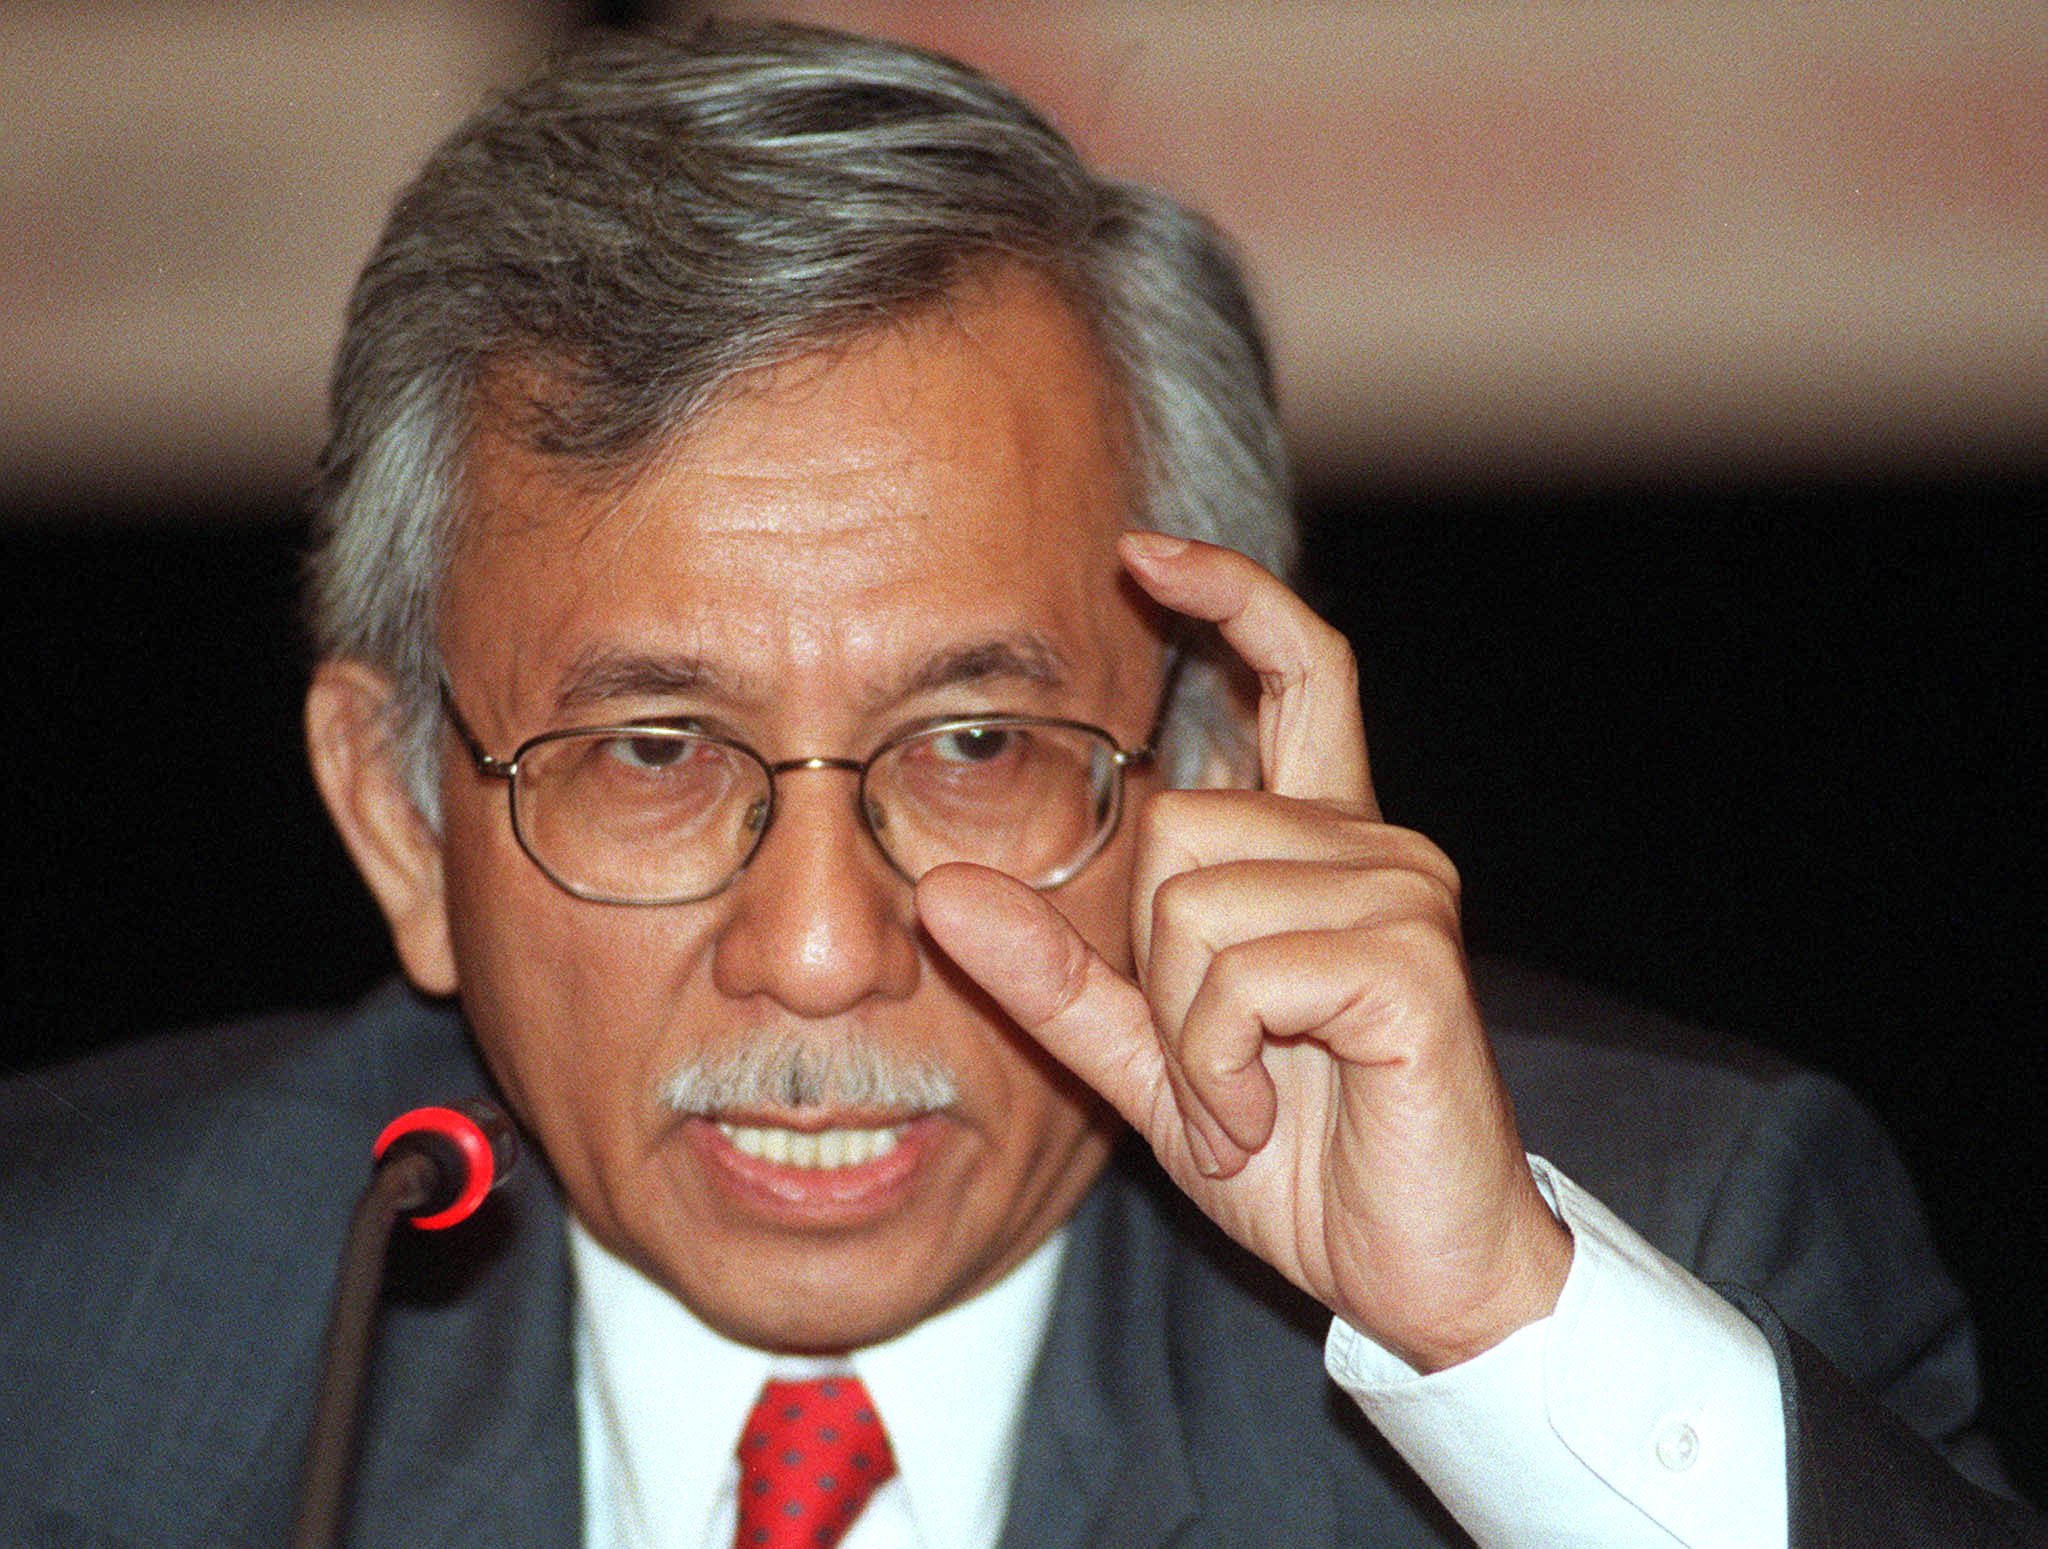 KLR01:MALAYSIA:KUALA LUMPUR,6OCT98 - Malaysian Special Functions Minister Daim Zainuddin speaks at the opening ceremony of National Congress on Economic Recovery in Kuala Lumpur October 6. Daim said Malaysia is negotiating with foreign governments to borrow money to help finance efforts to revive the economy.  bm/Photo by Bazuki Muhammad    REUTERS